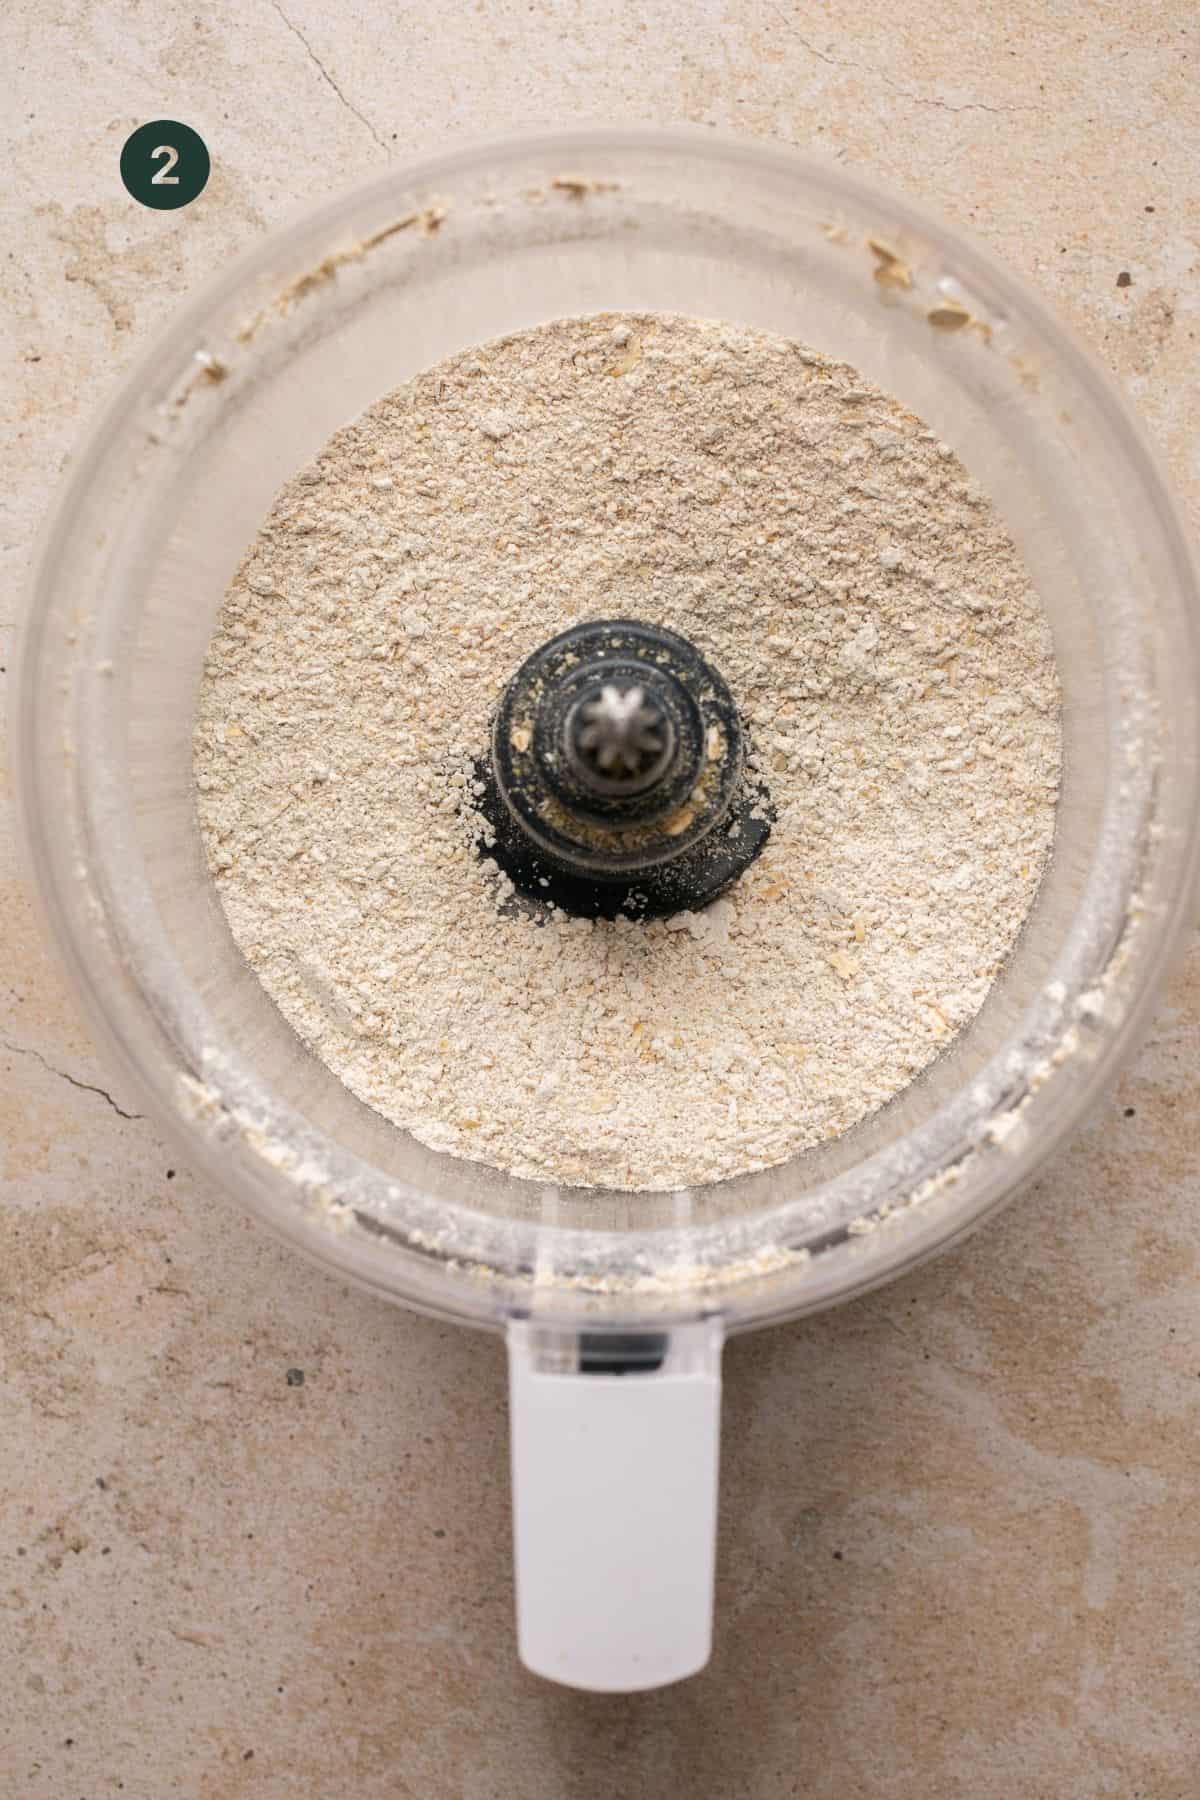 Processed oats to flour in a food processor.